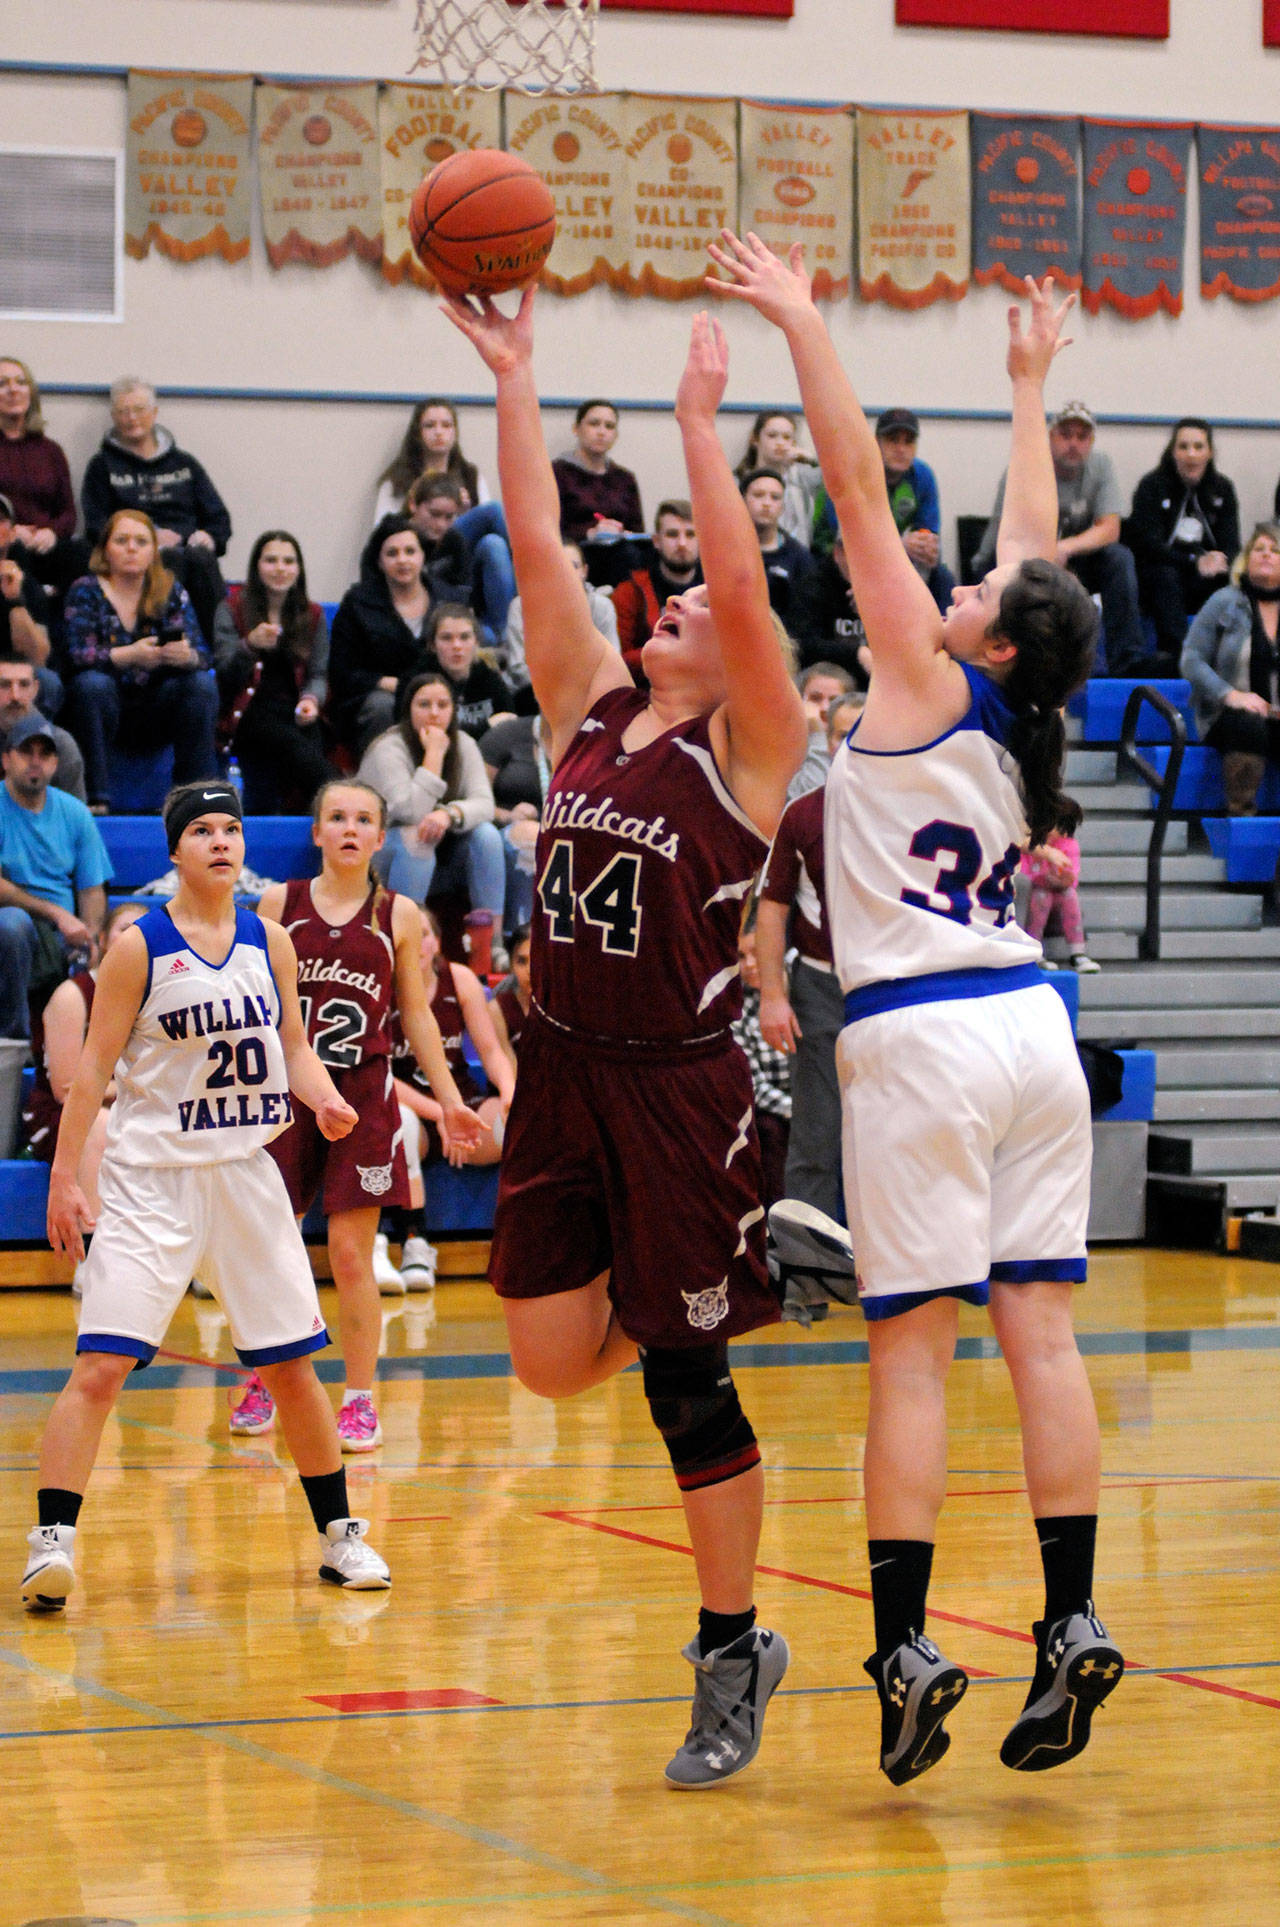 Ocosta’s Kristi Raffelson scores two of her 10 points during the second half of the Wildcats’ 43-40 win over Willapa Valley on Tuesday in Menlo. In her first game back from a knee injury, Raffelson scored six points and two assists in the Wildcats’ fourth-quarter rally. (Ryan Sparks | Grays Harbor News Group)